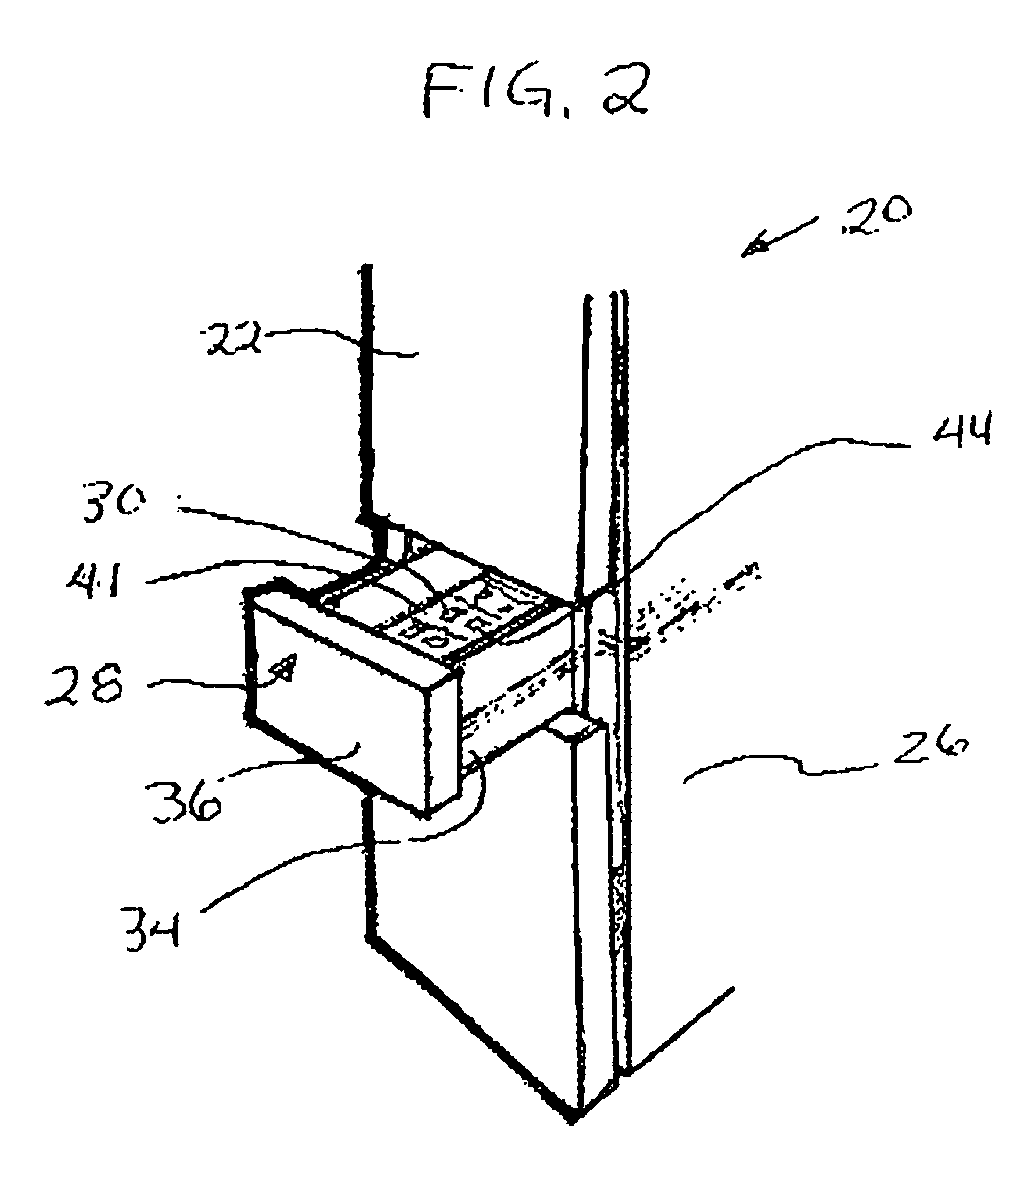 Electrical accessory charging compartment for a cabinet and retrofit components therefor